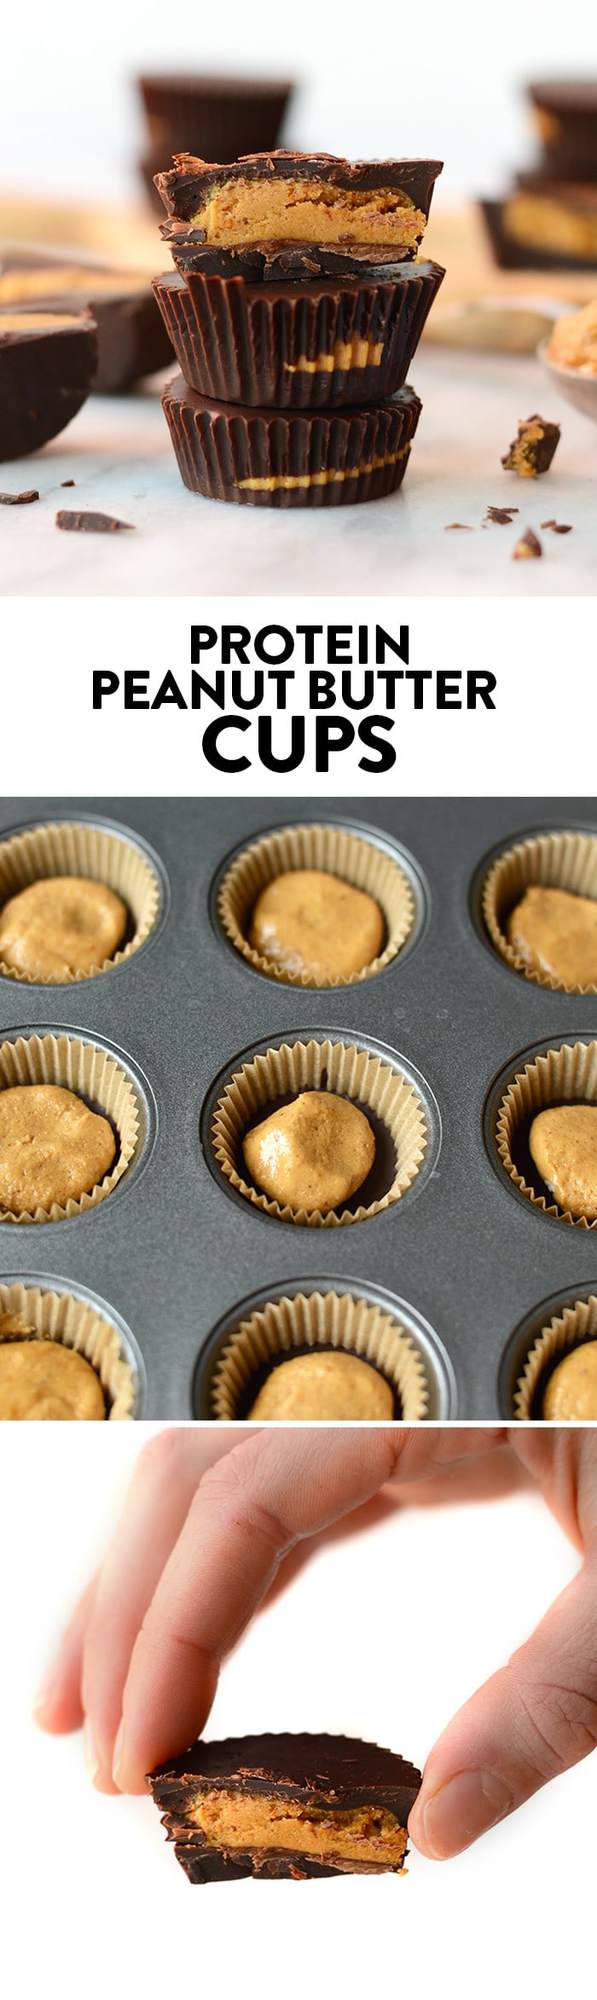 What's better than a peanut butter cup?  A peanut butter cup with extra protein!  Make these delicious Protein Peanut Butter Cups with just a few ingredients!